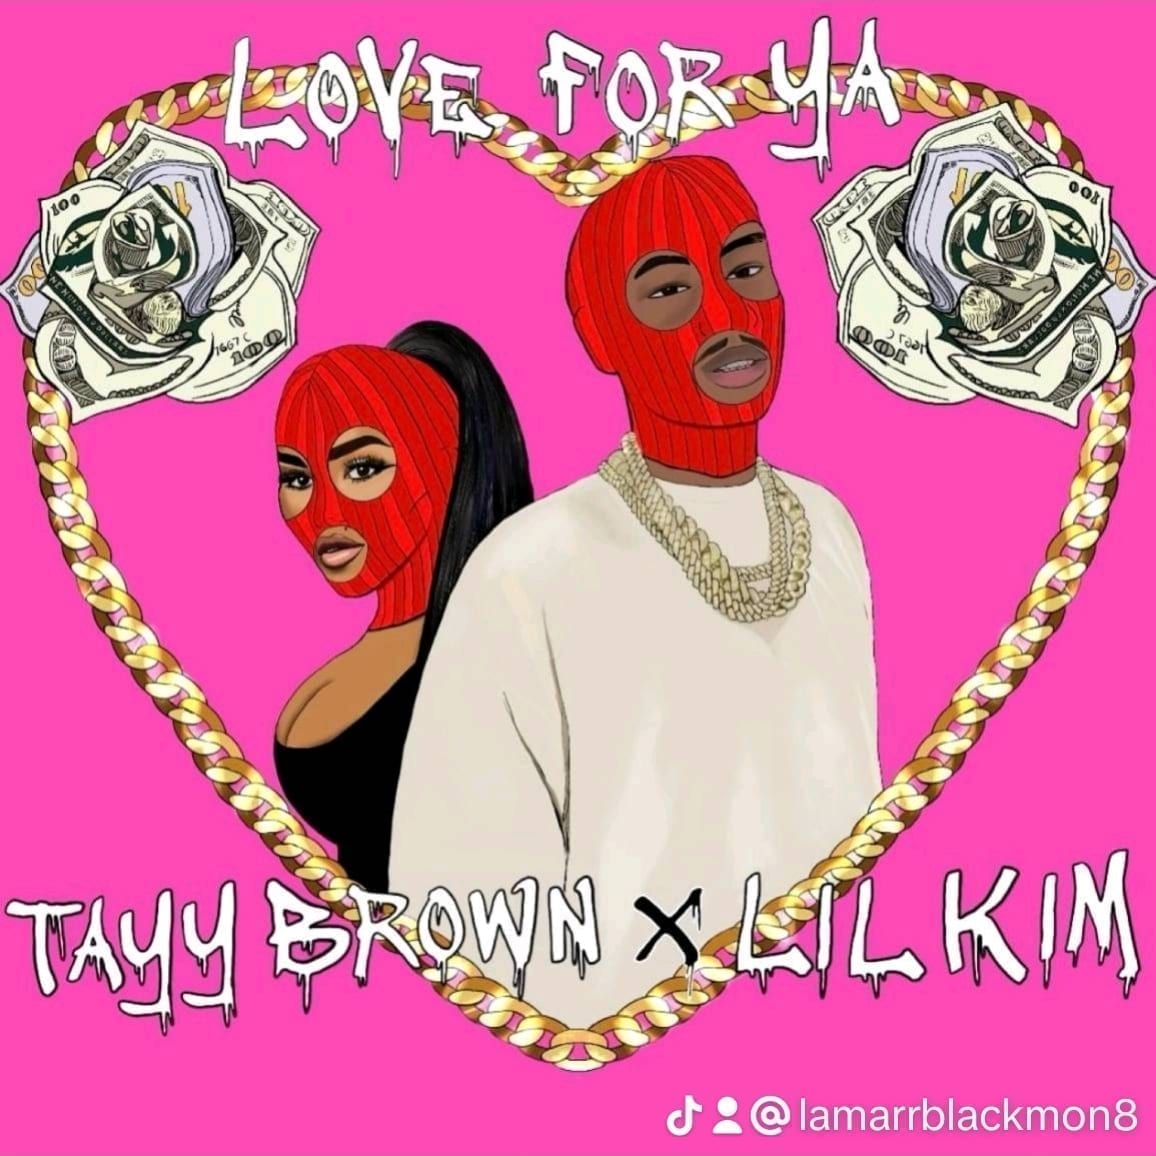 New York Artist #TAYYBROWN Releases New Single 'Love For Ya' Feat Lil Kim hbcuconnect.com/content/393351… #hbcuconnect